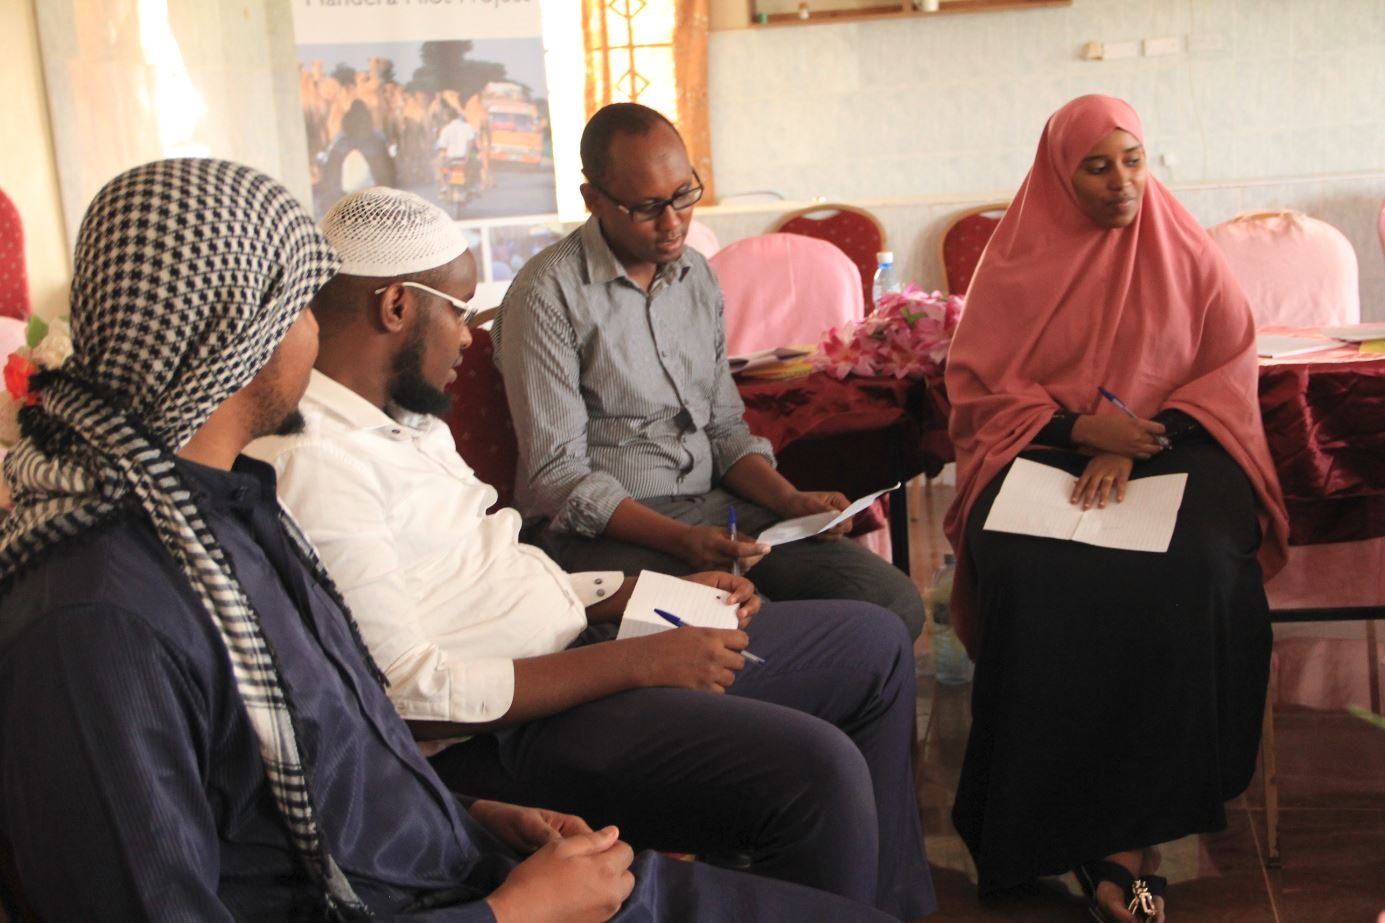 01_Members of the new Mandera Programme team during their induction. Photo credit - Interpeace